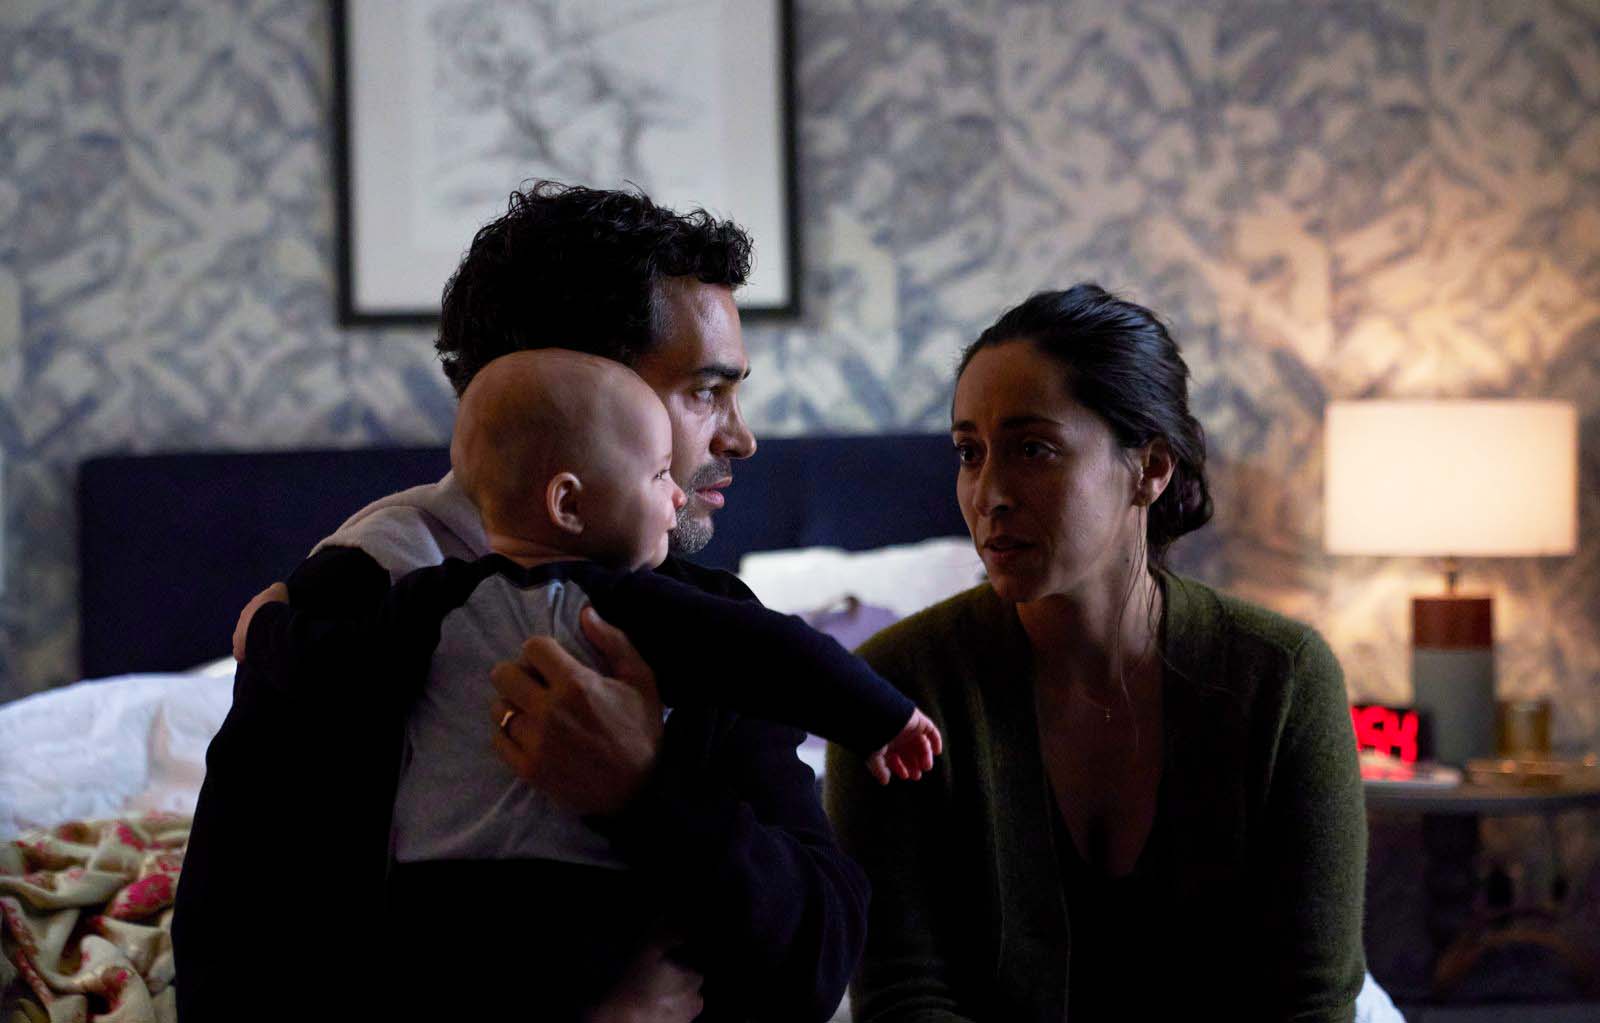 A man holds a baby while his wife looks at him in a scene from Lullaby.